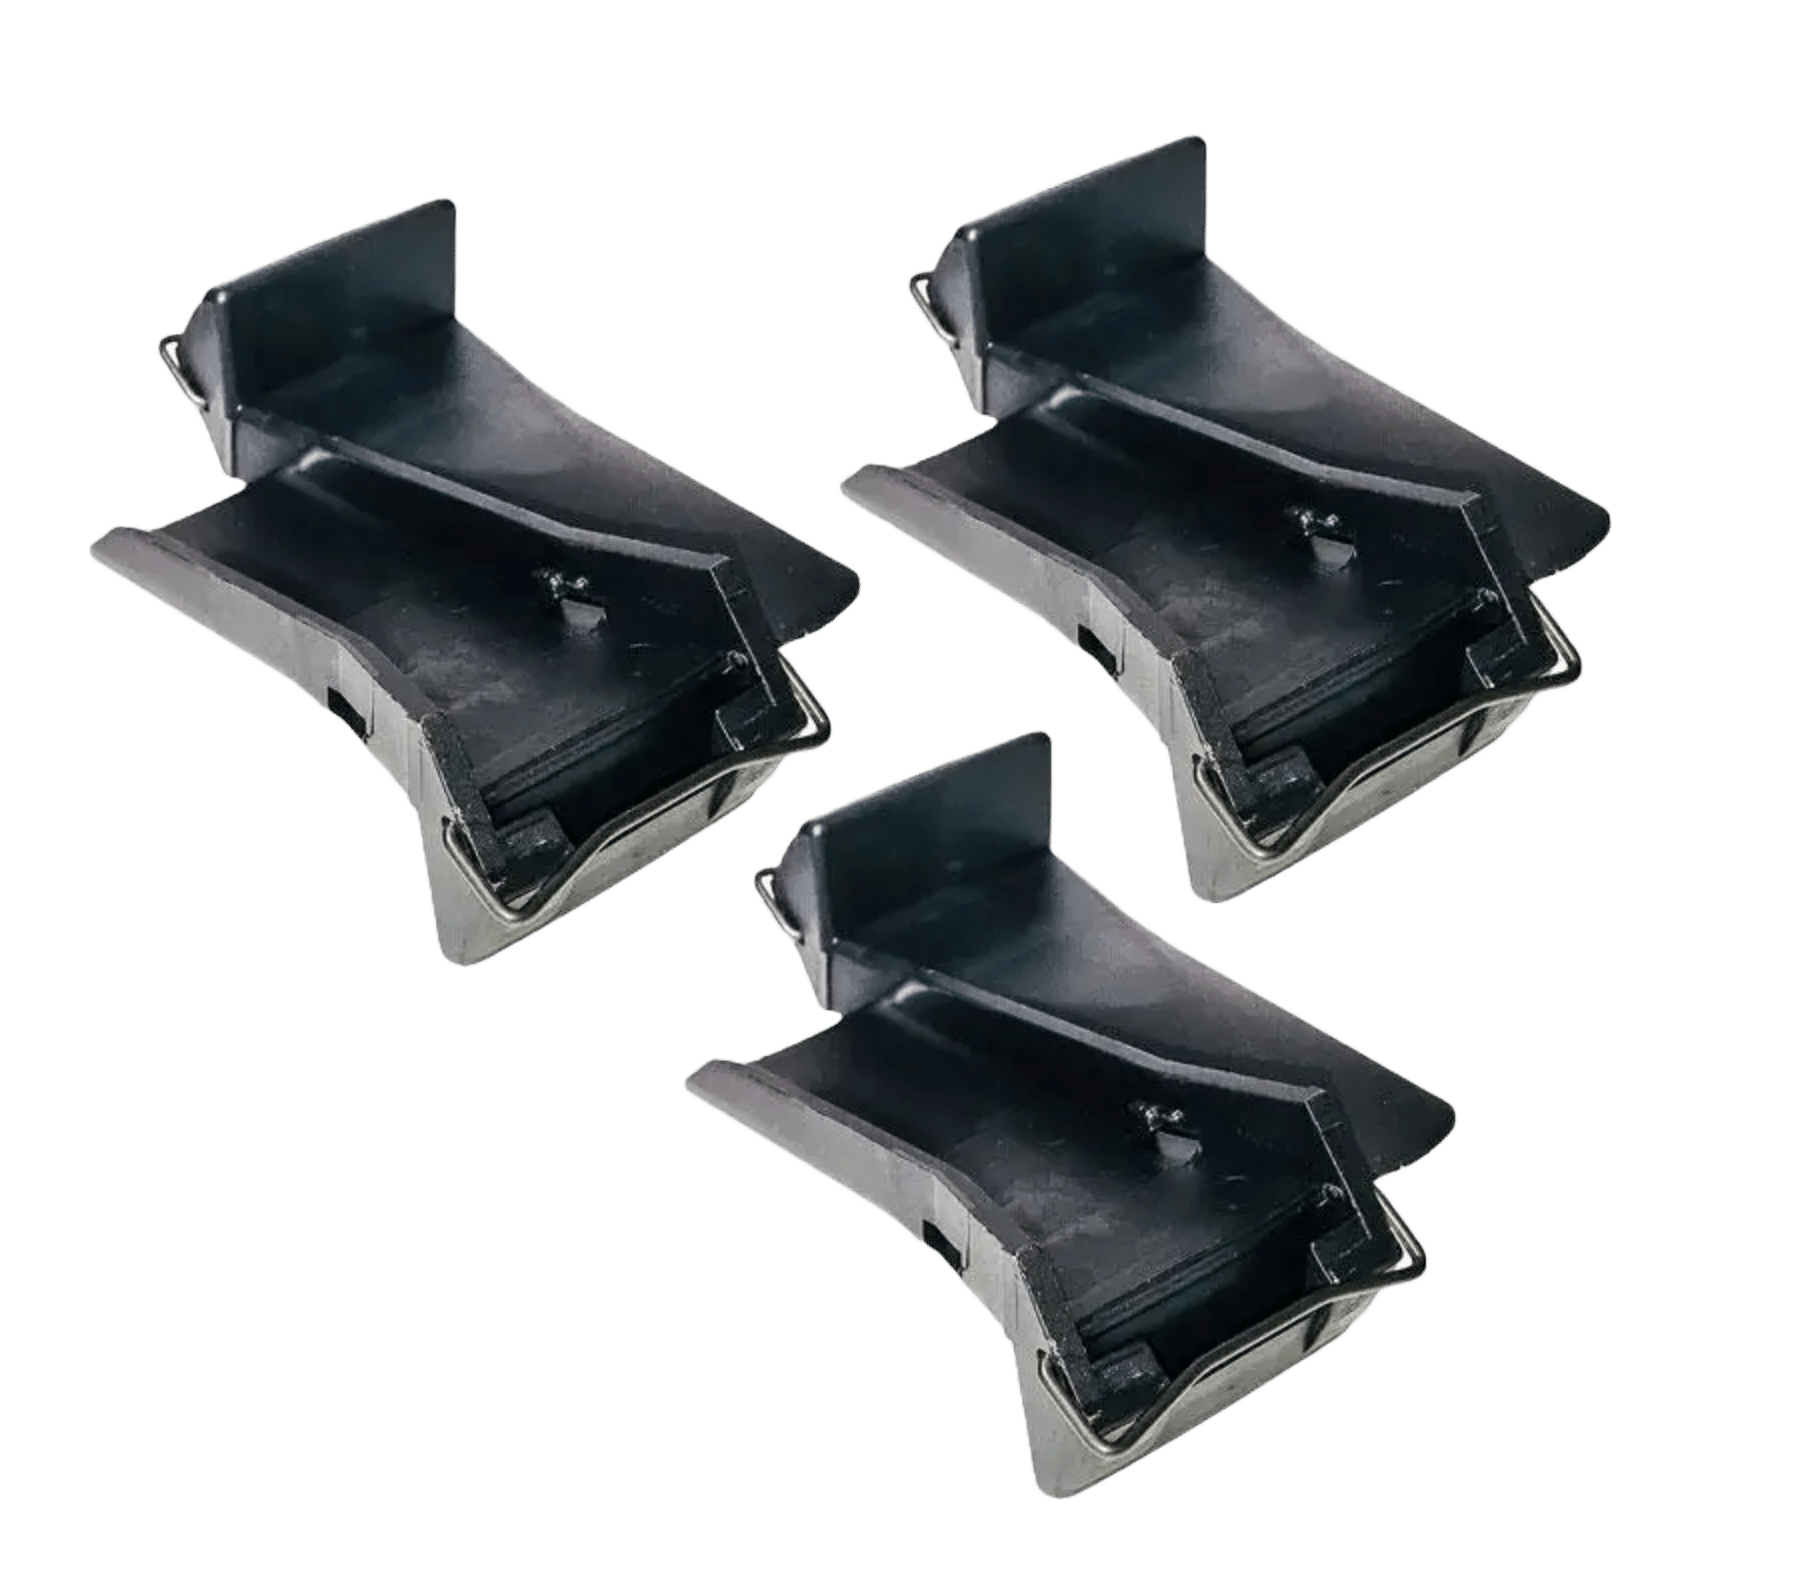 Nylon covers for steel tire changer clamps